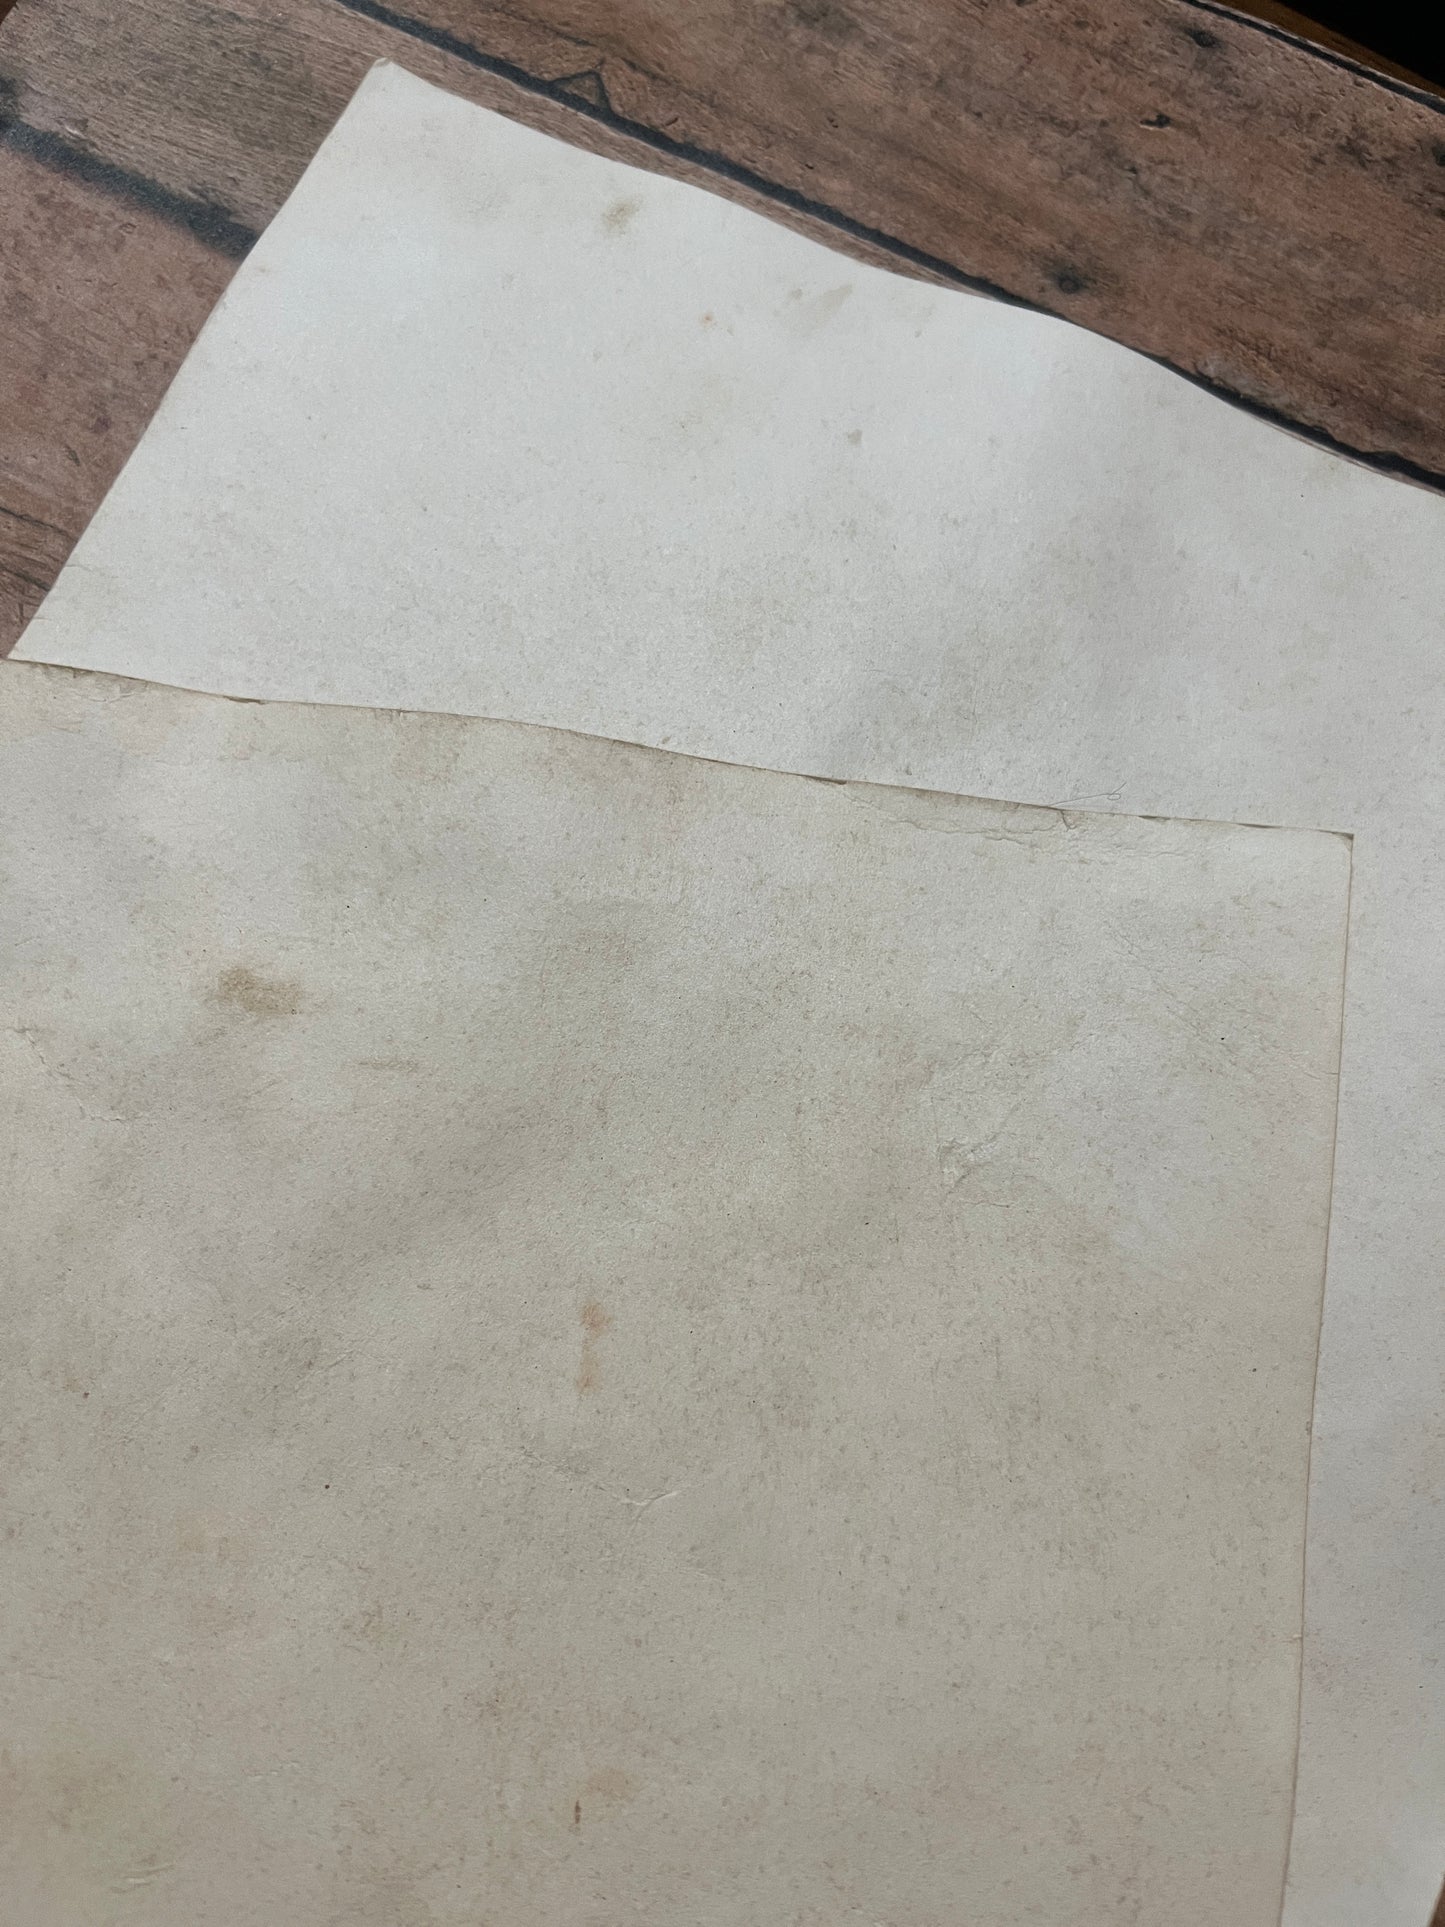 Magically Infused Parchment Paper